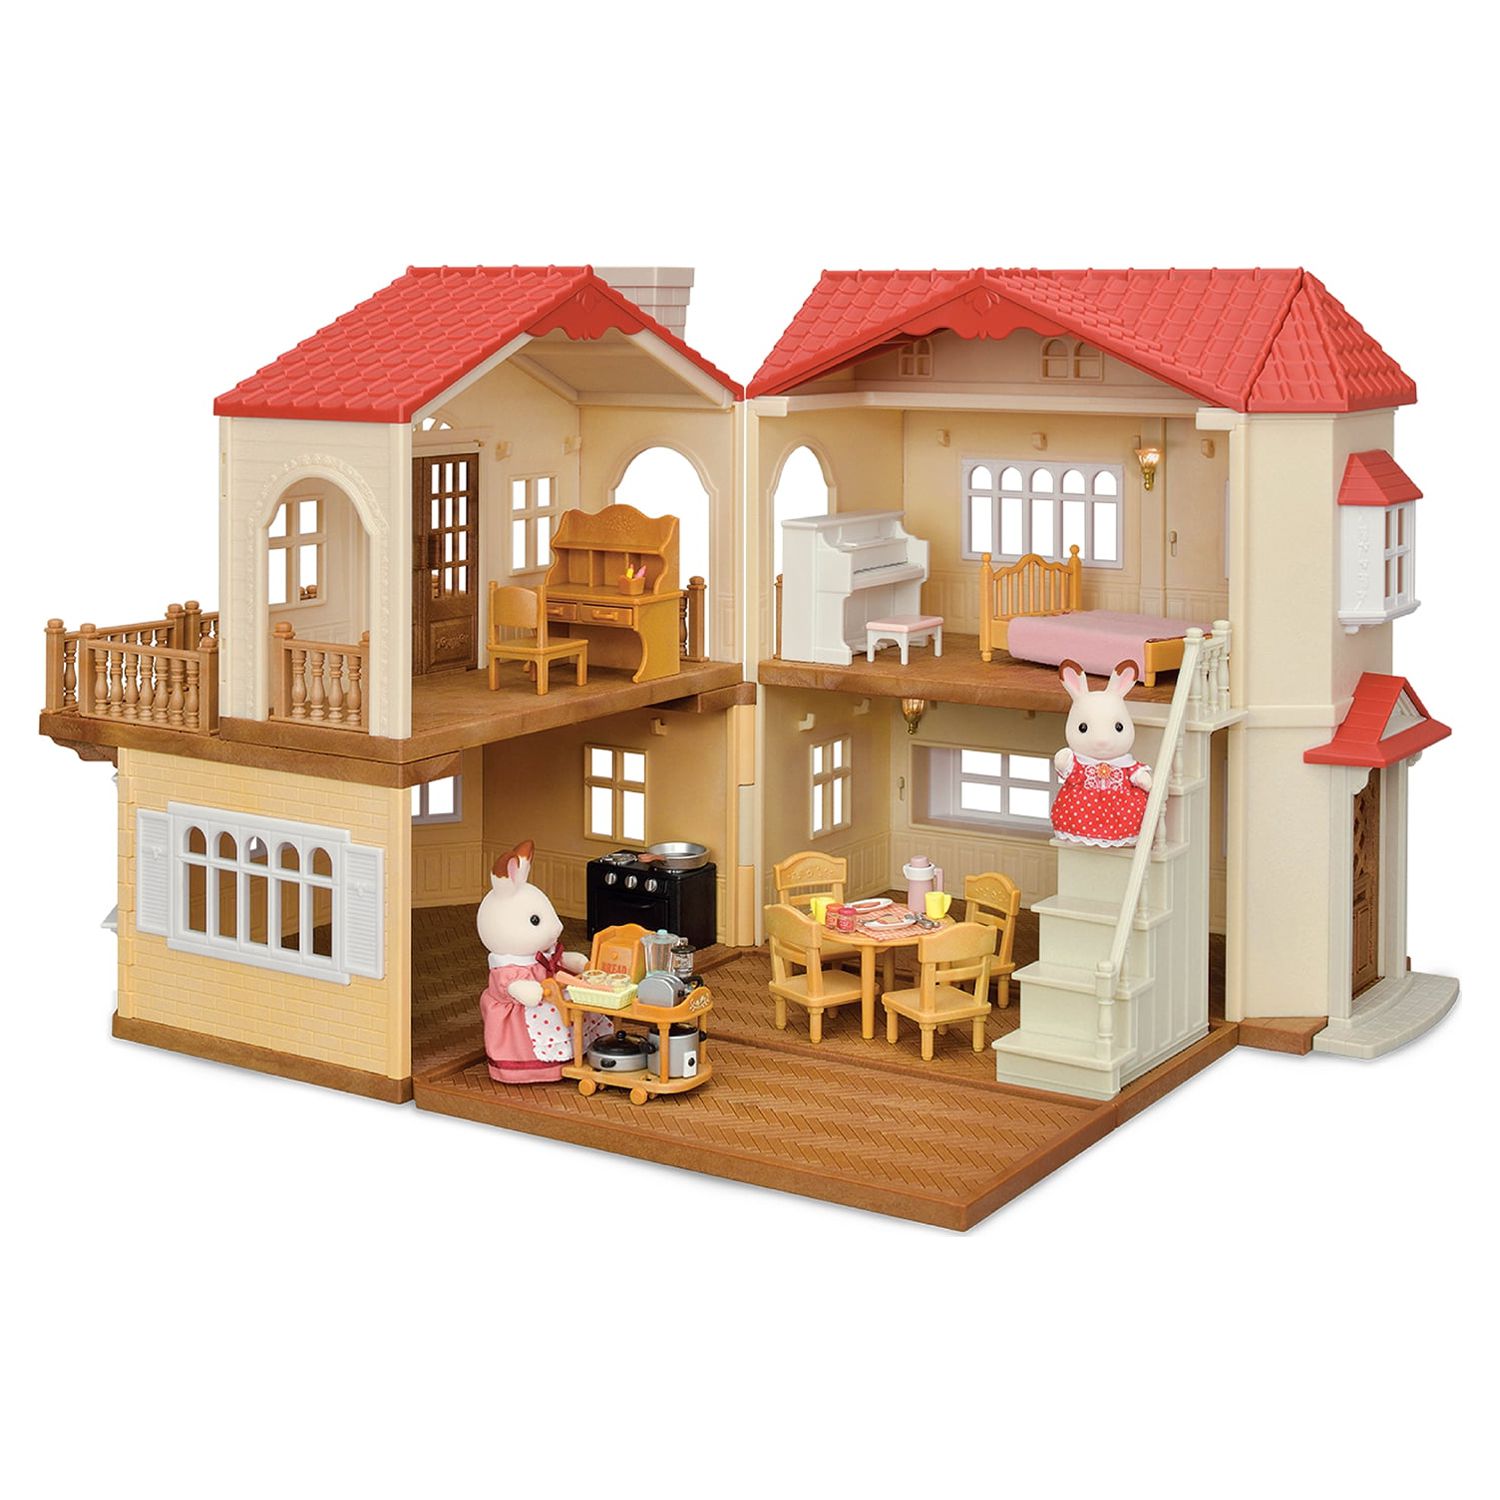 Calico Critters Red Roof Country Home, Dollhouse Playset with Figures, Furniture and Accessories - image 1 of 7